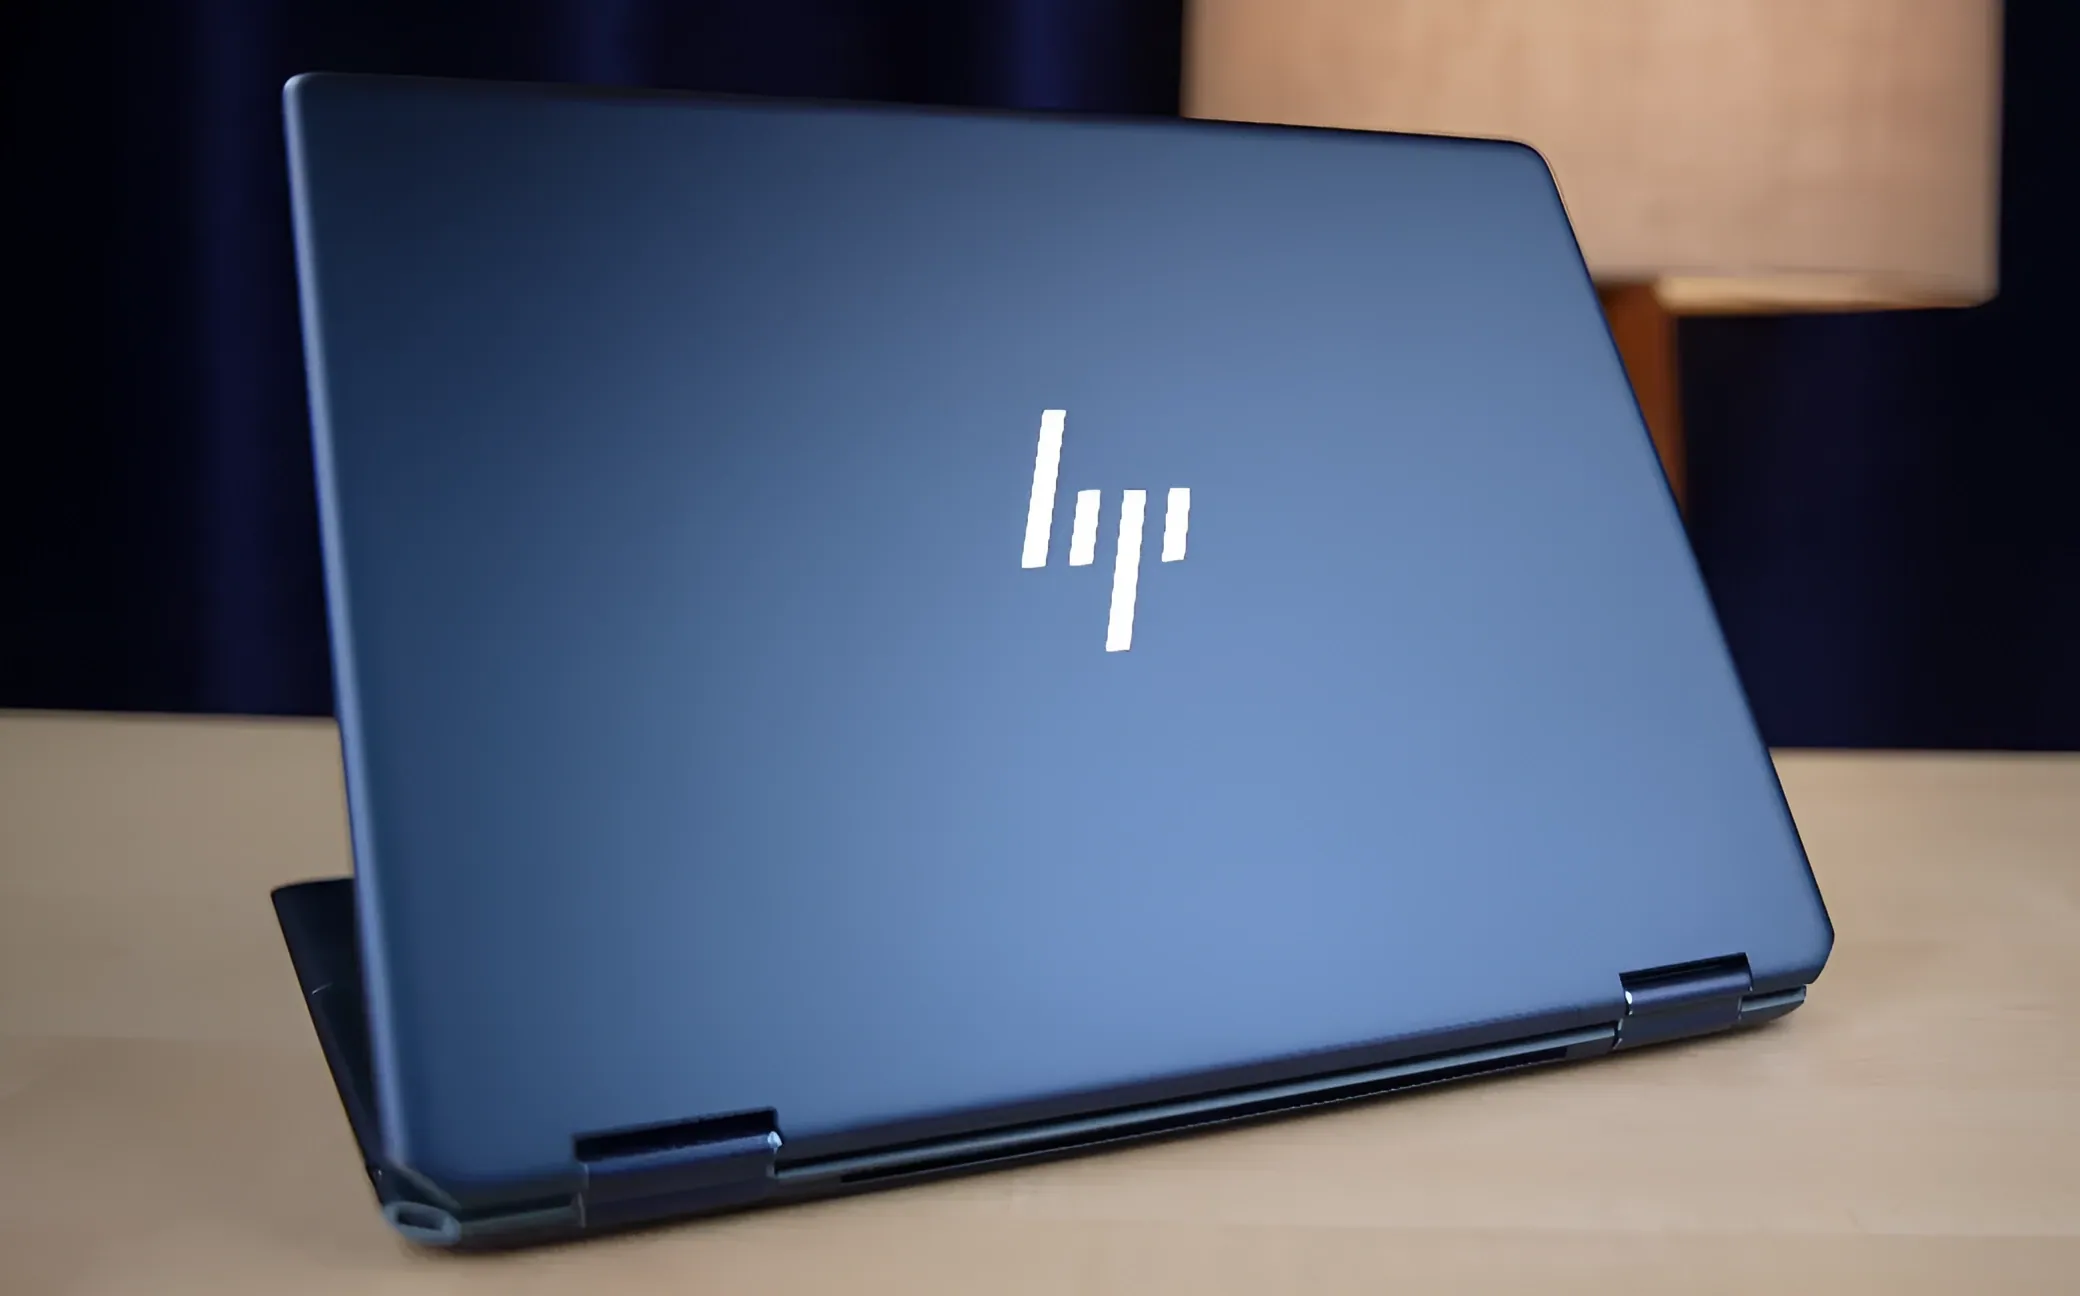 Detailed Review of HP Spectre x360 with 12th Gen Intel Core Processor